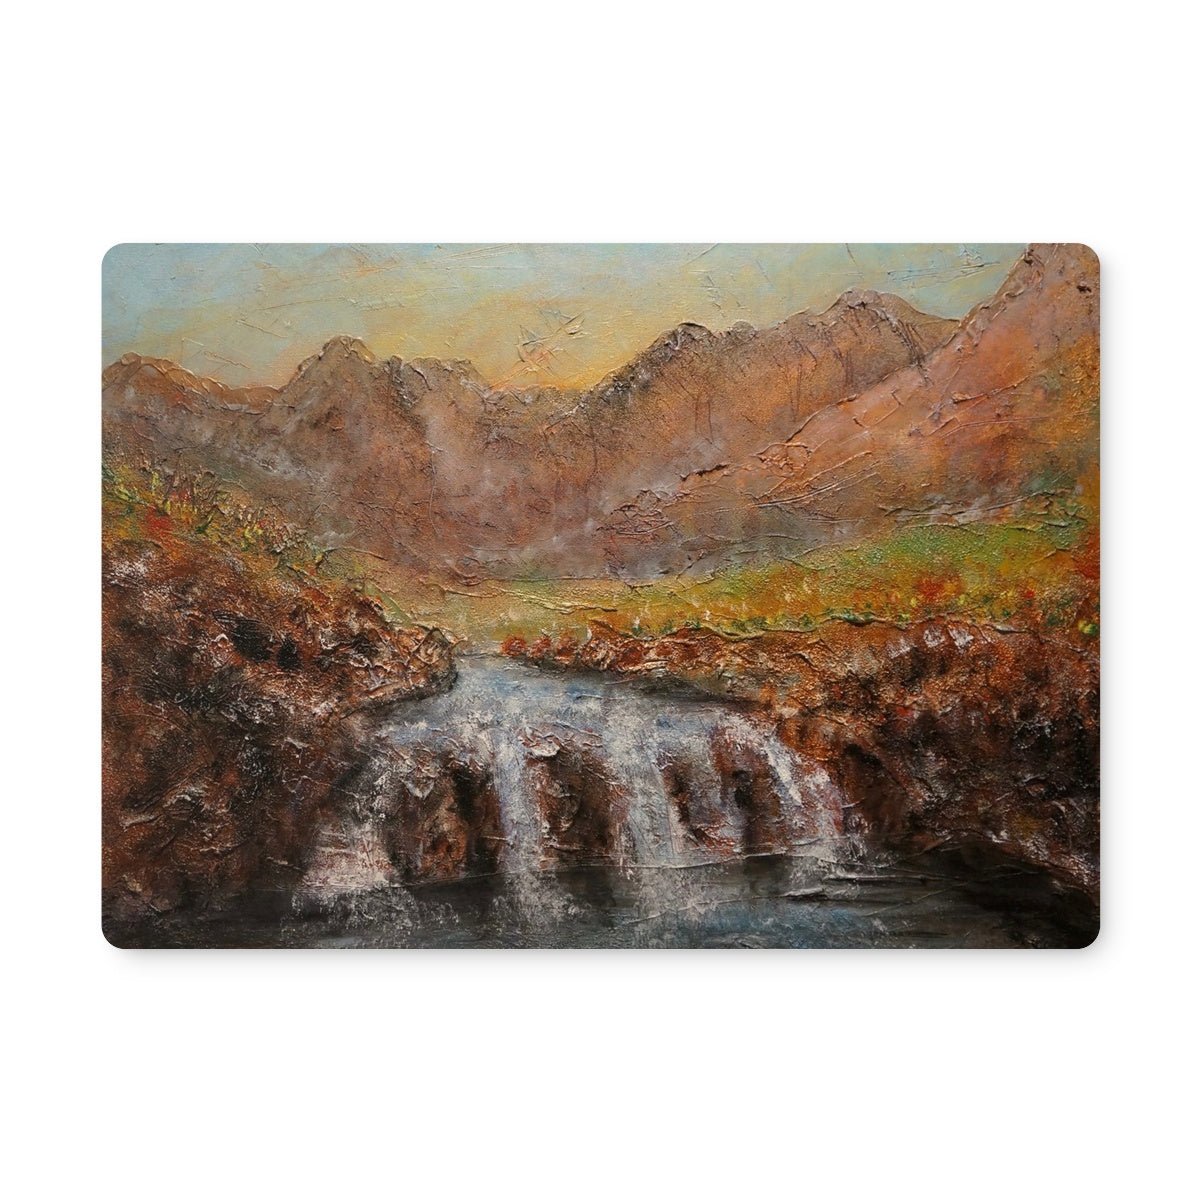 Fairy Pools Dawn Skye Art Gifts Placemat-Placemats-Skye Art Gallery-2 Placemats-Paintings, Prints, Homeware, Art Gifts From Scotland By Scottish Artist Kevin Hunter